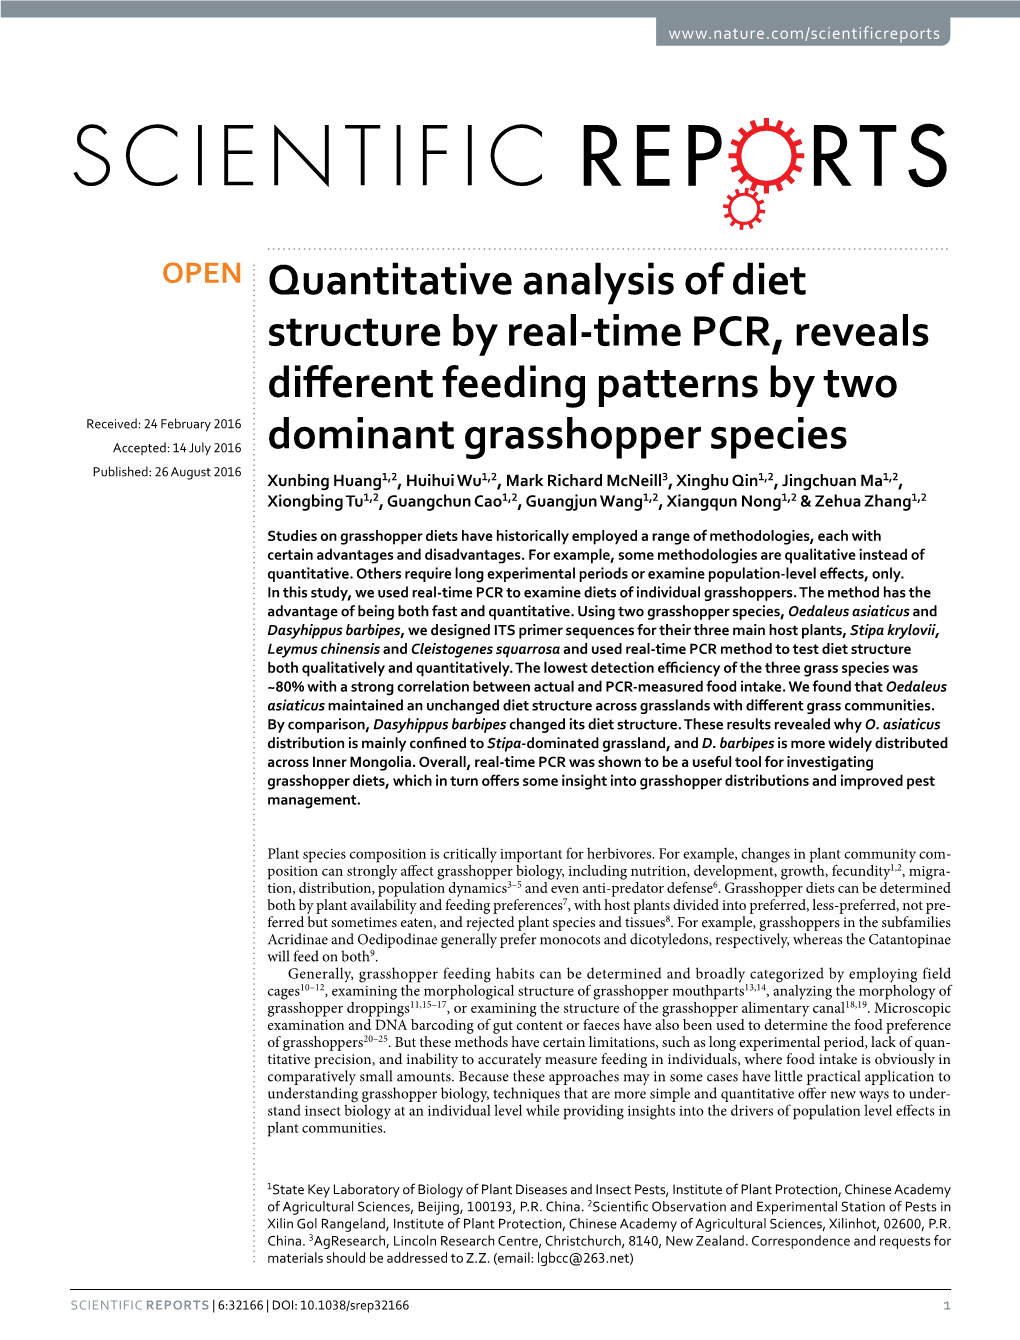 Quantitative Analysis of Diet Structure by Real-Time PCR, Reveals Different